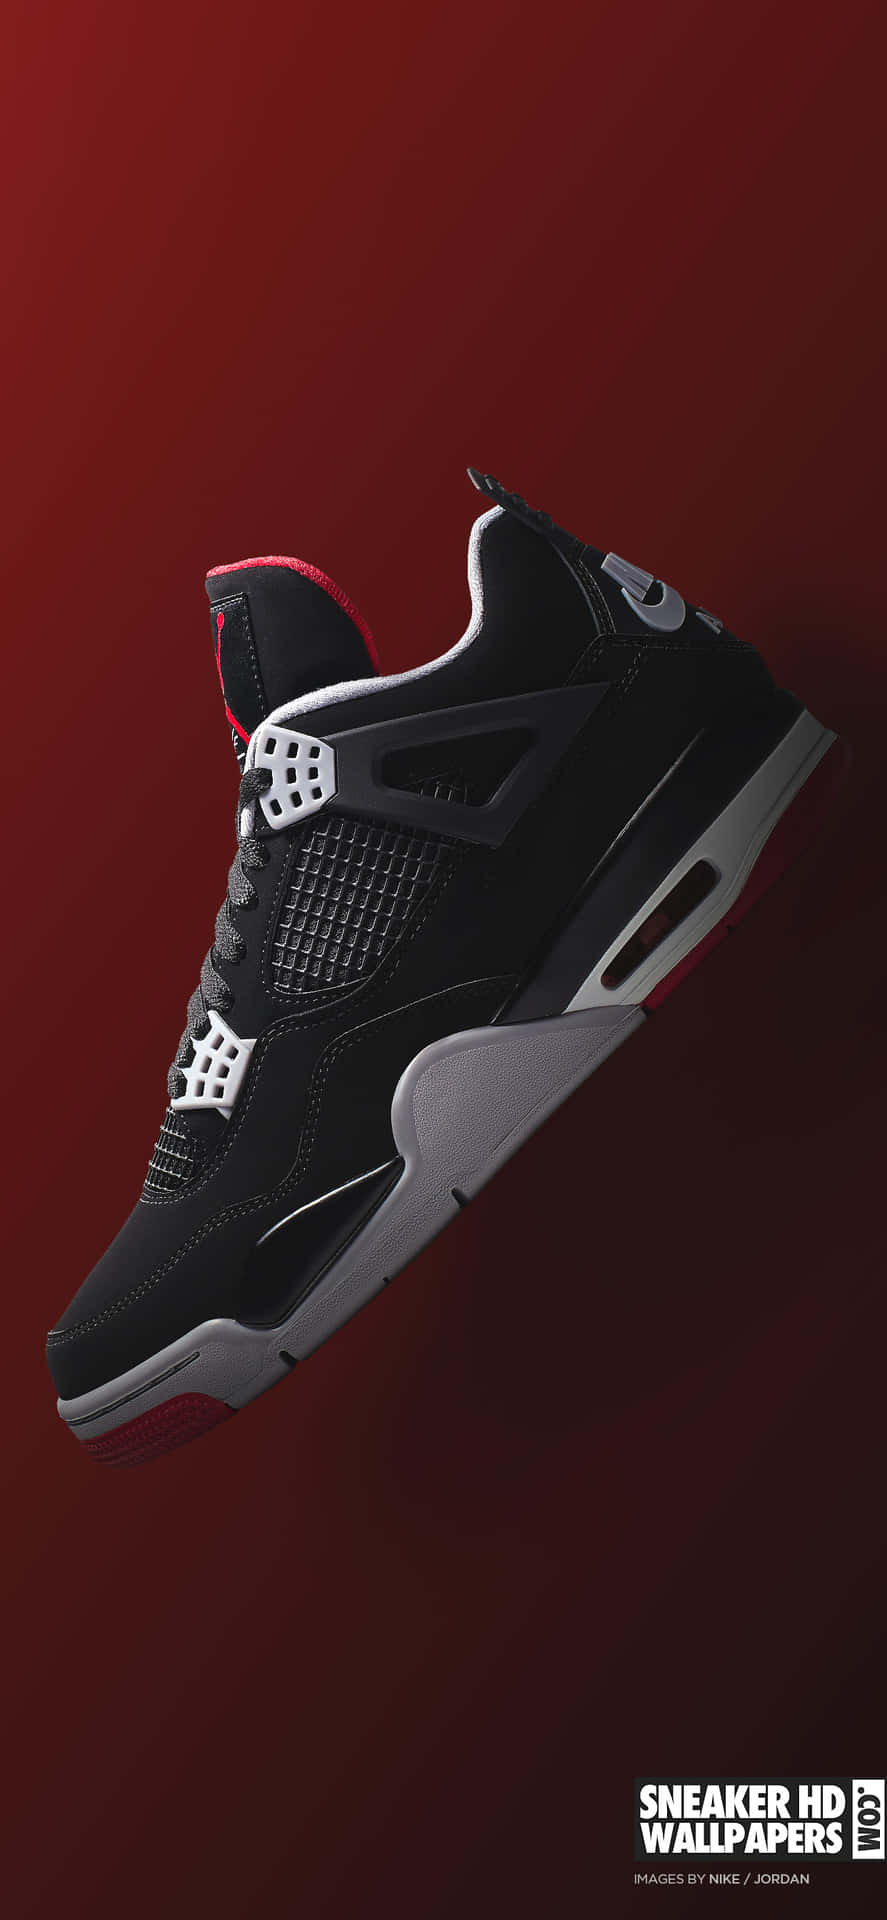 Take Flight With The Black Air Force Wallpaper